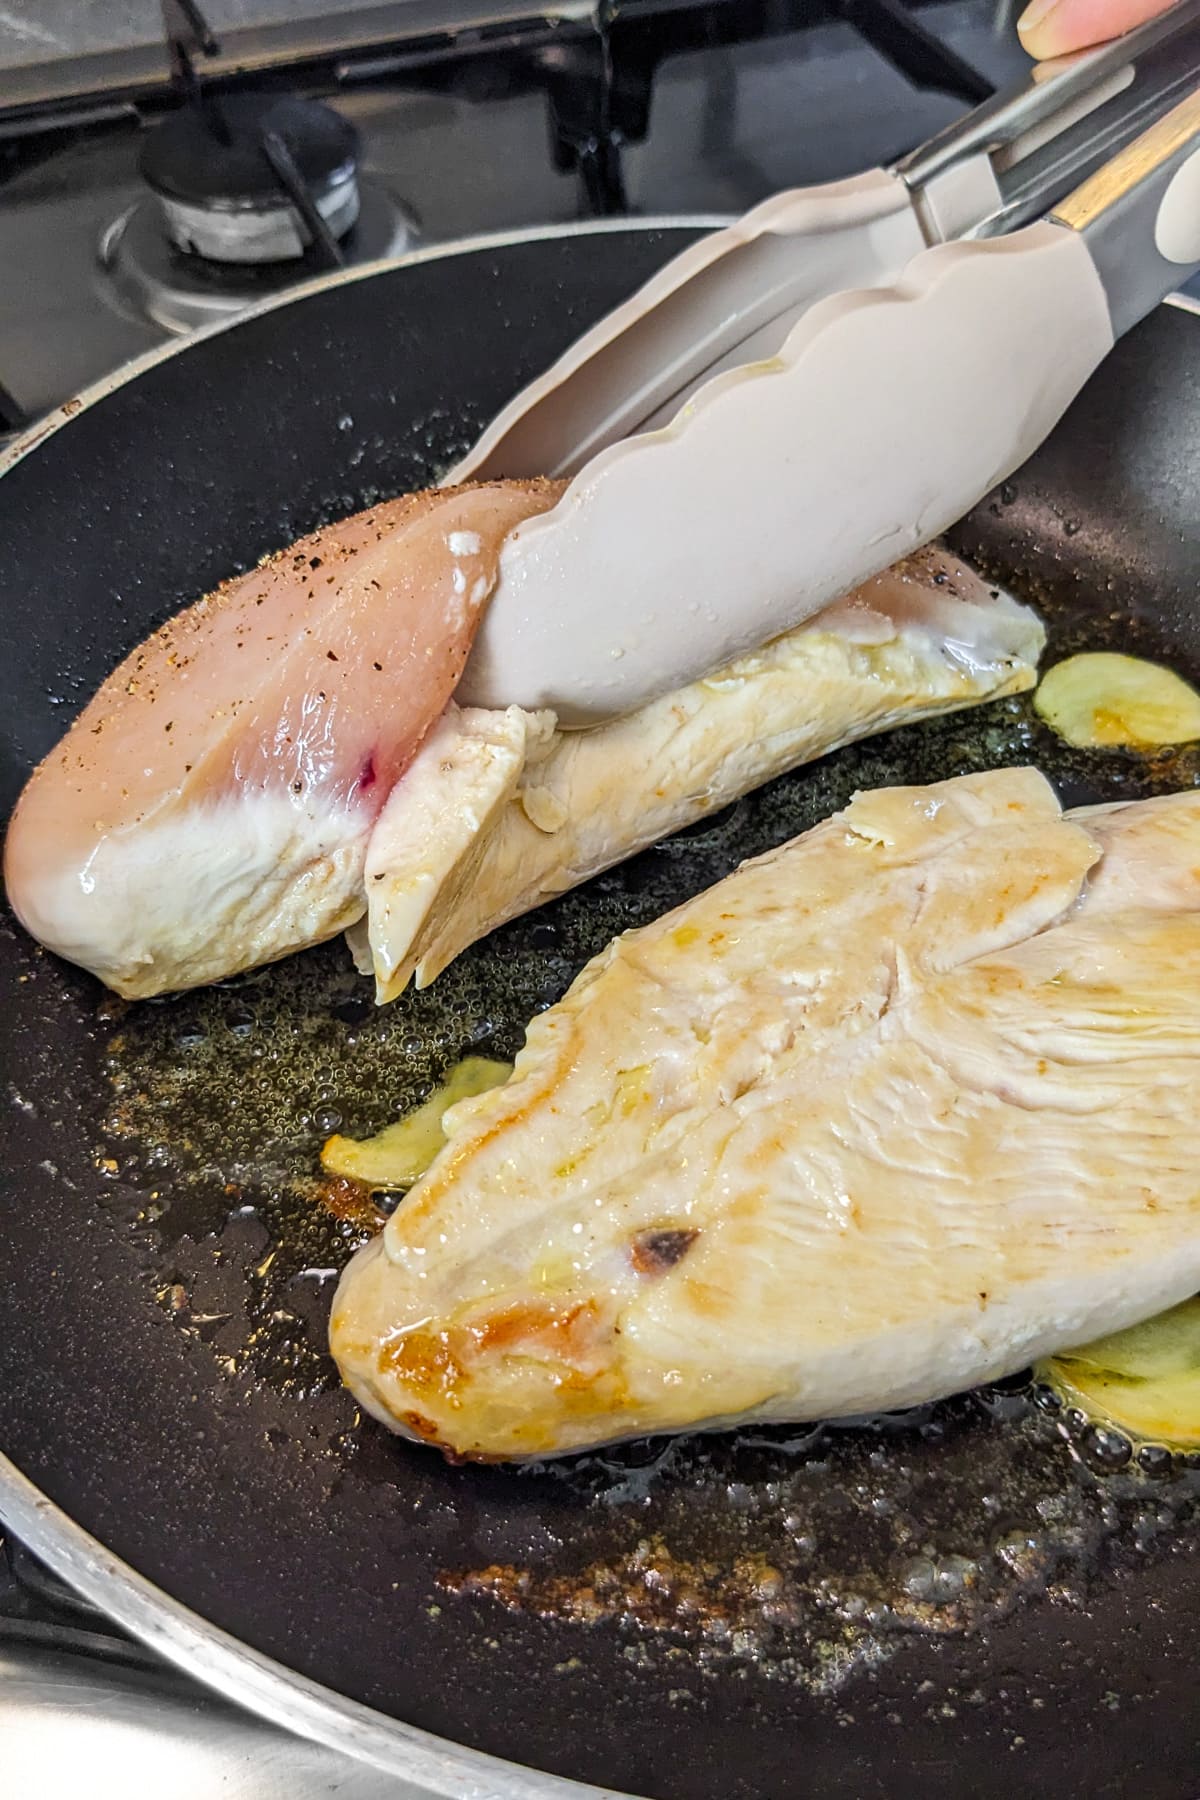 Silicone kitchen tongs holding a chicken breast fillet in a frying pan.